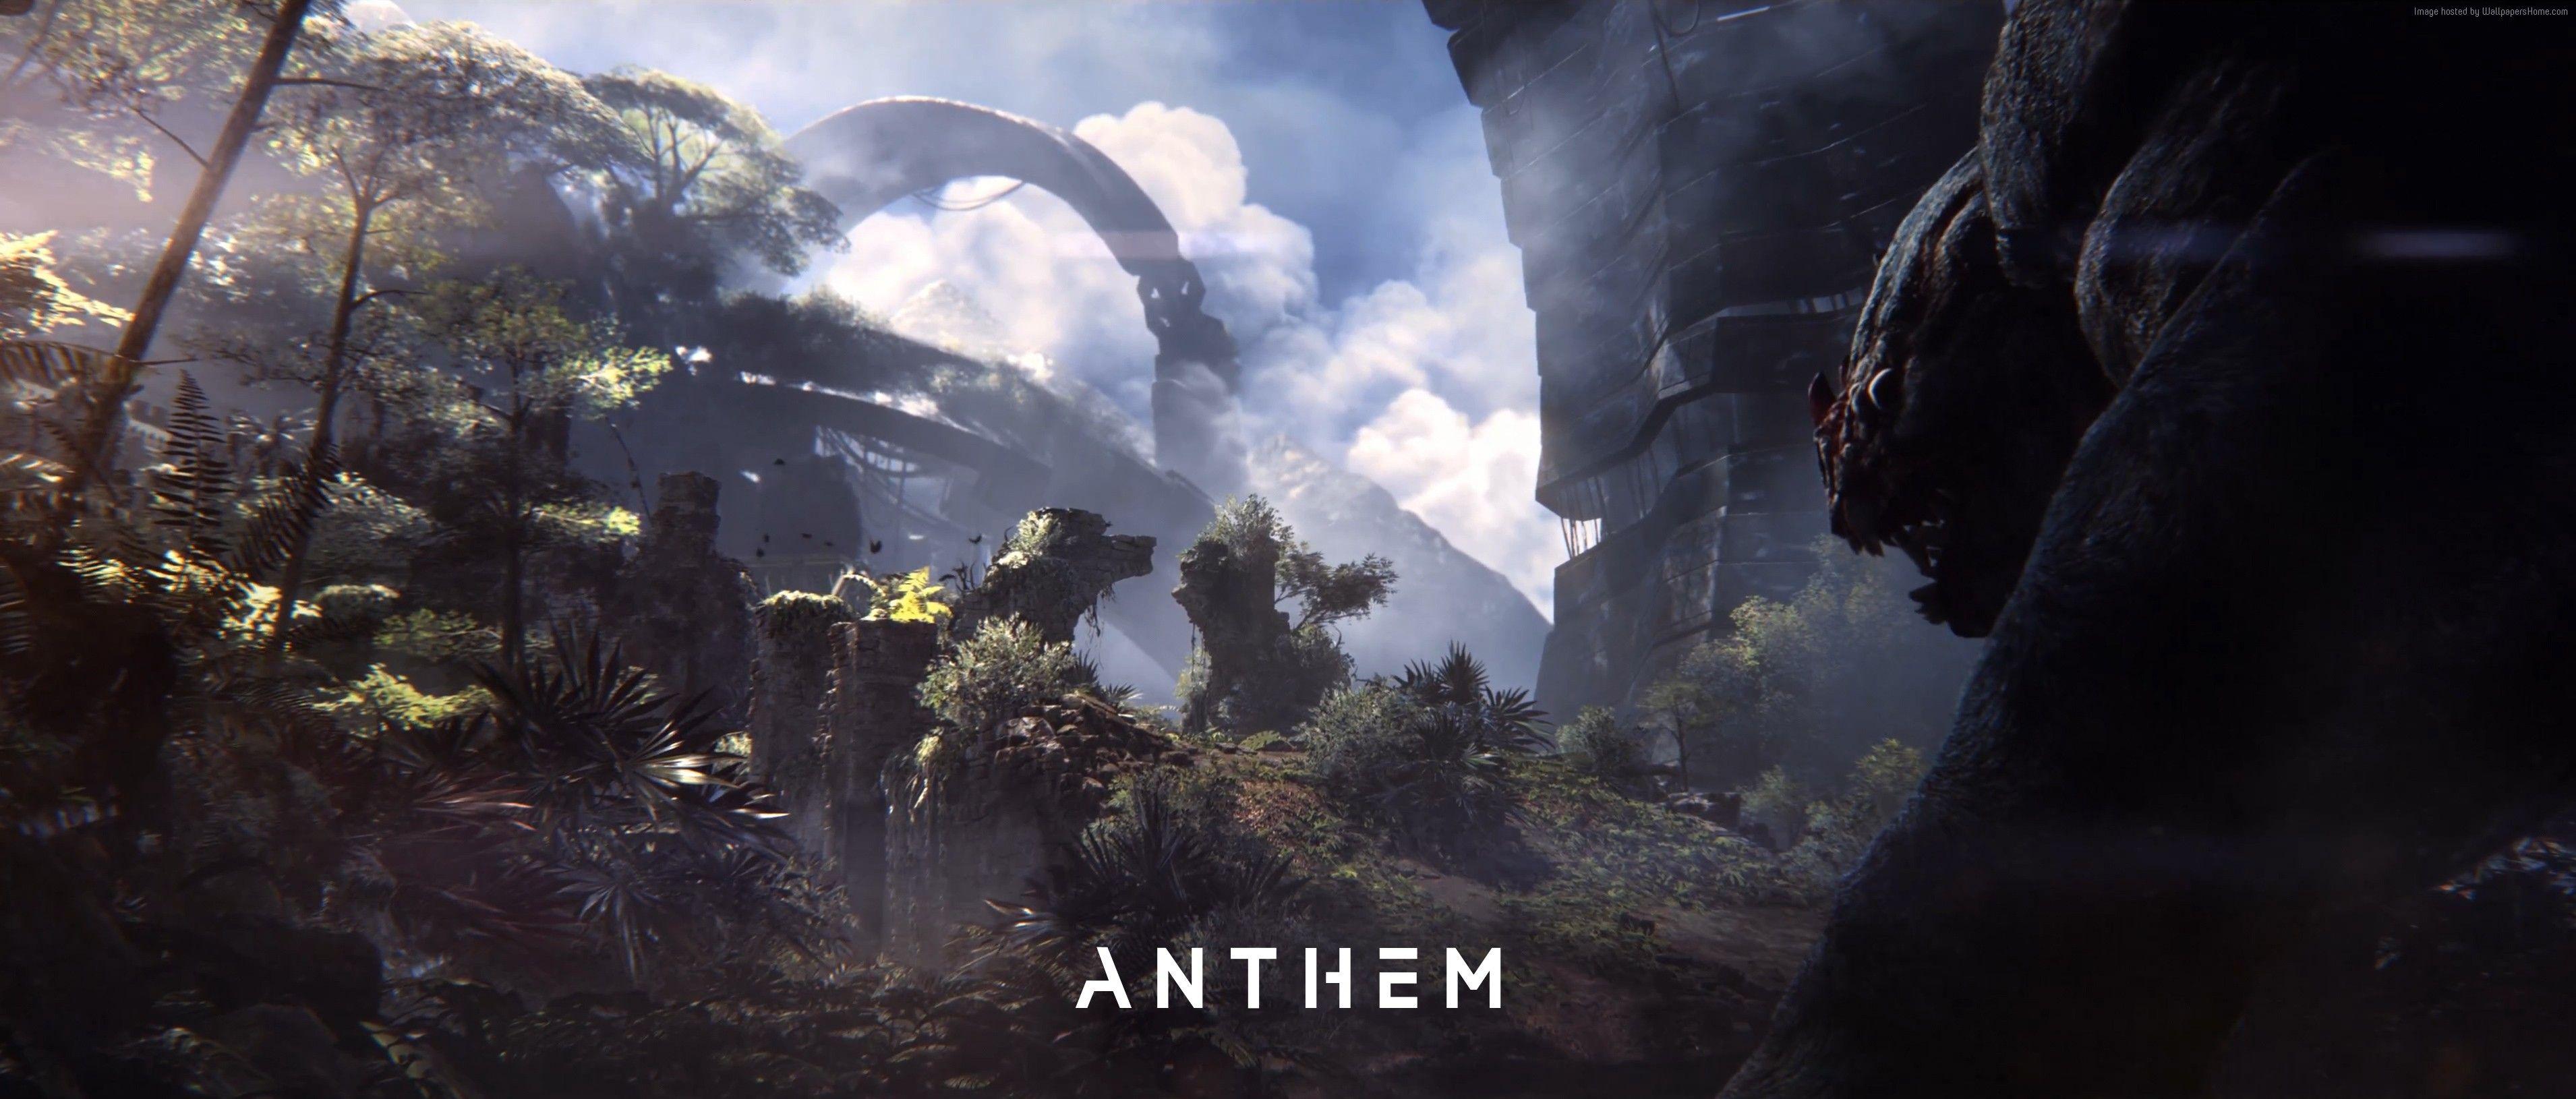 anthem hd wallpaper background image 2560x1367 id on anthem wallpapers